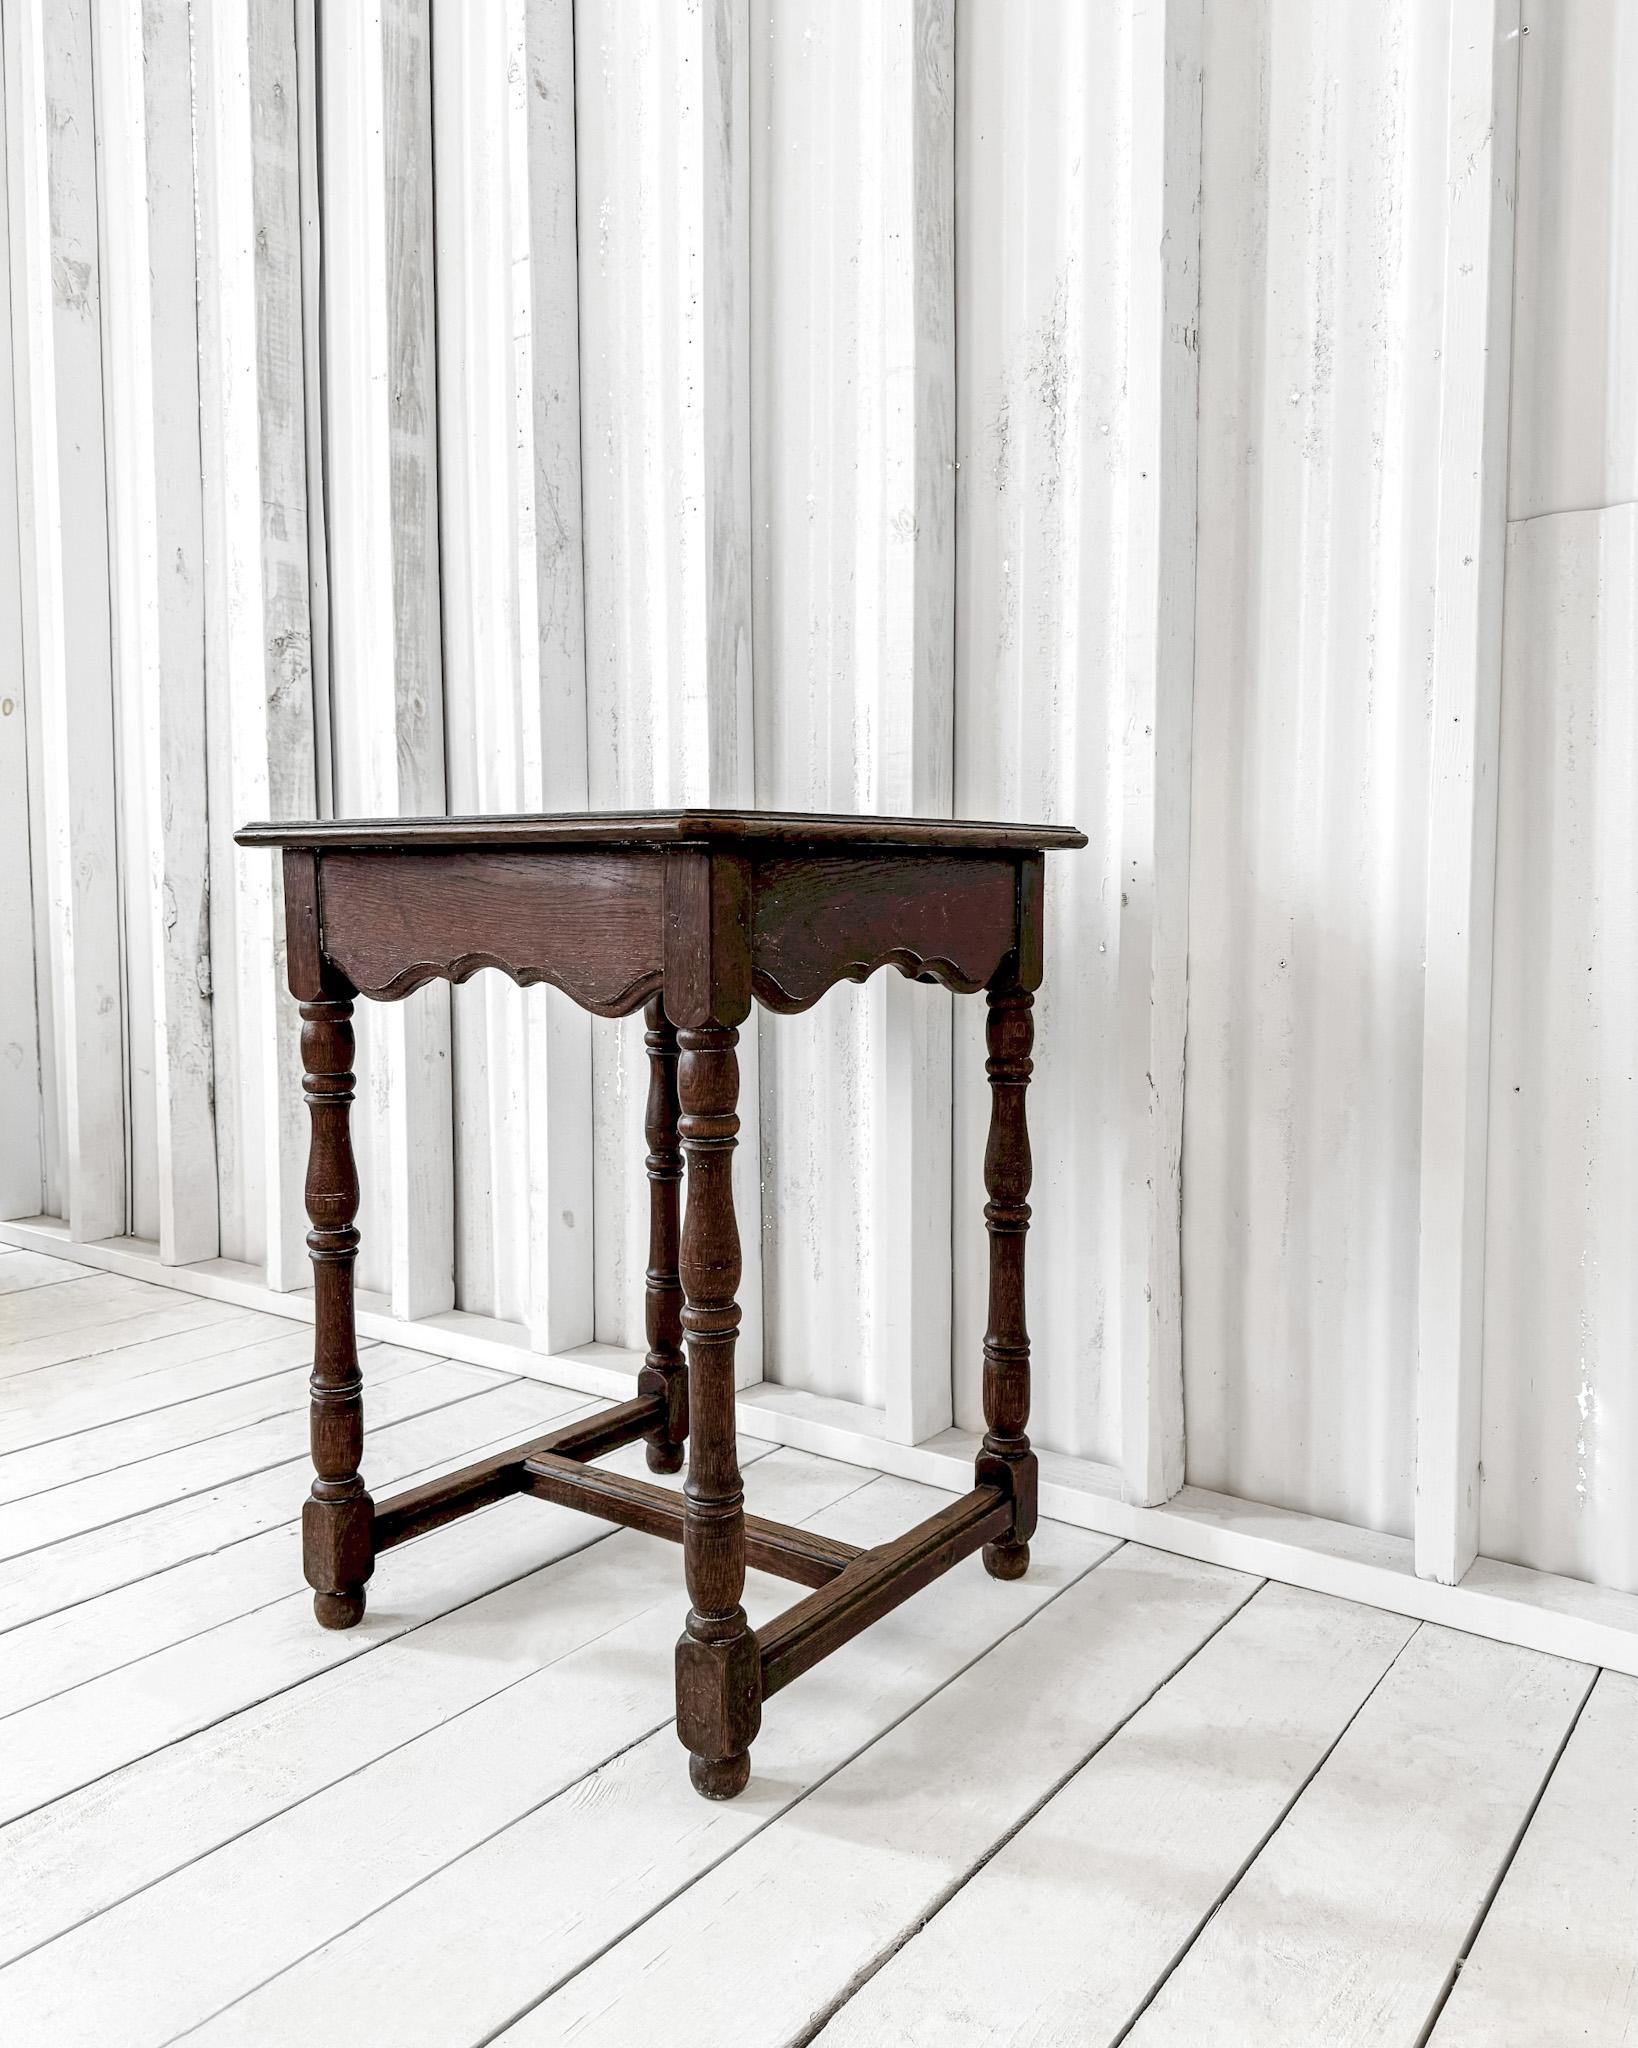 19th Century English Trestle Base Accent Table with Dark Stain For Sale 5